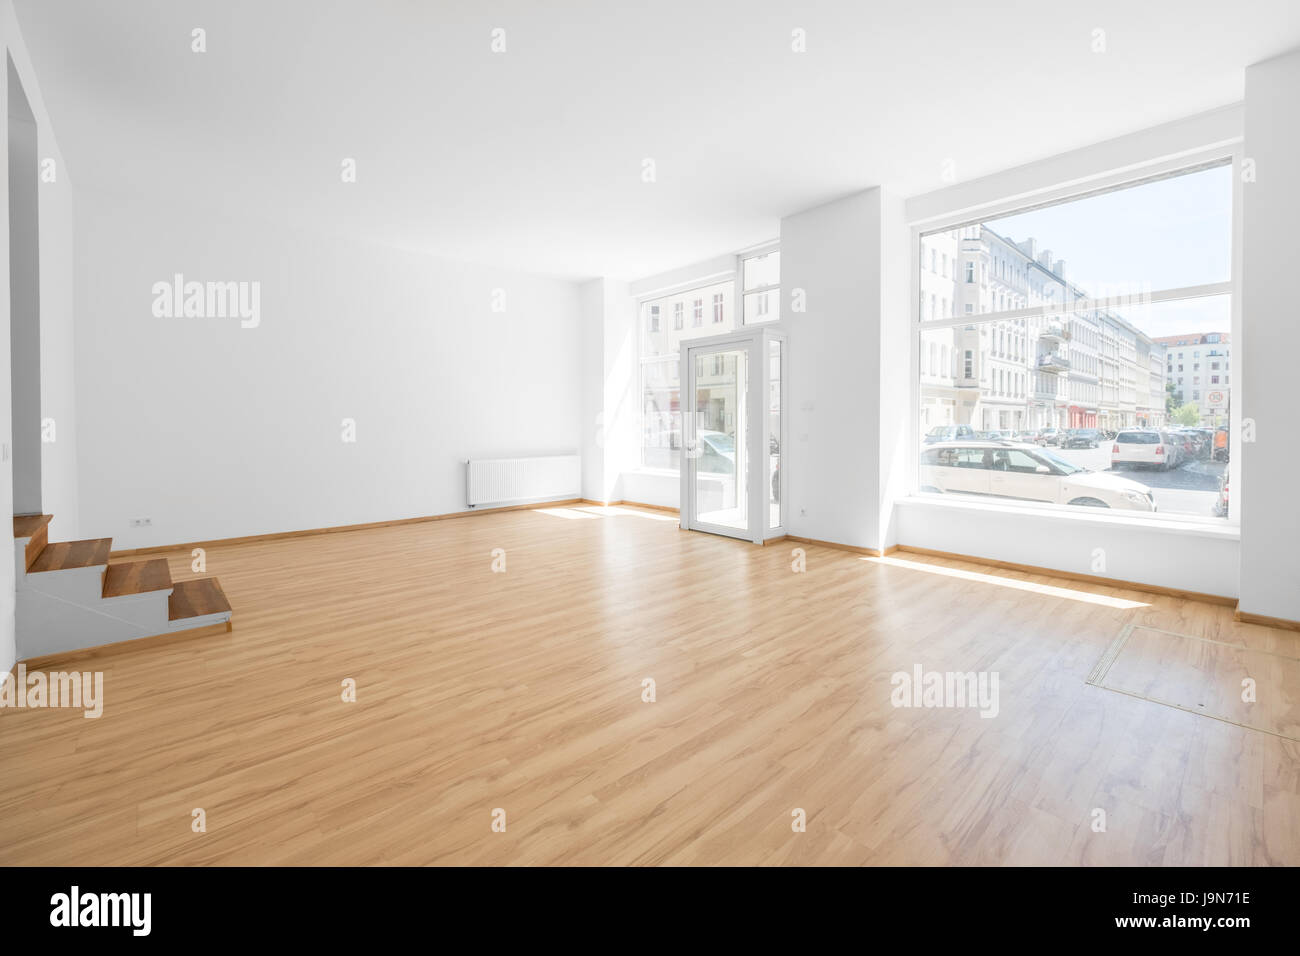 empty shop interior with shopping window Stock Photo